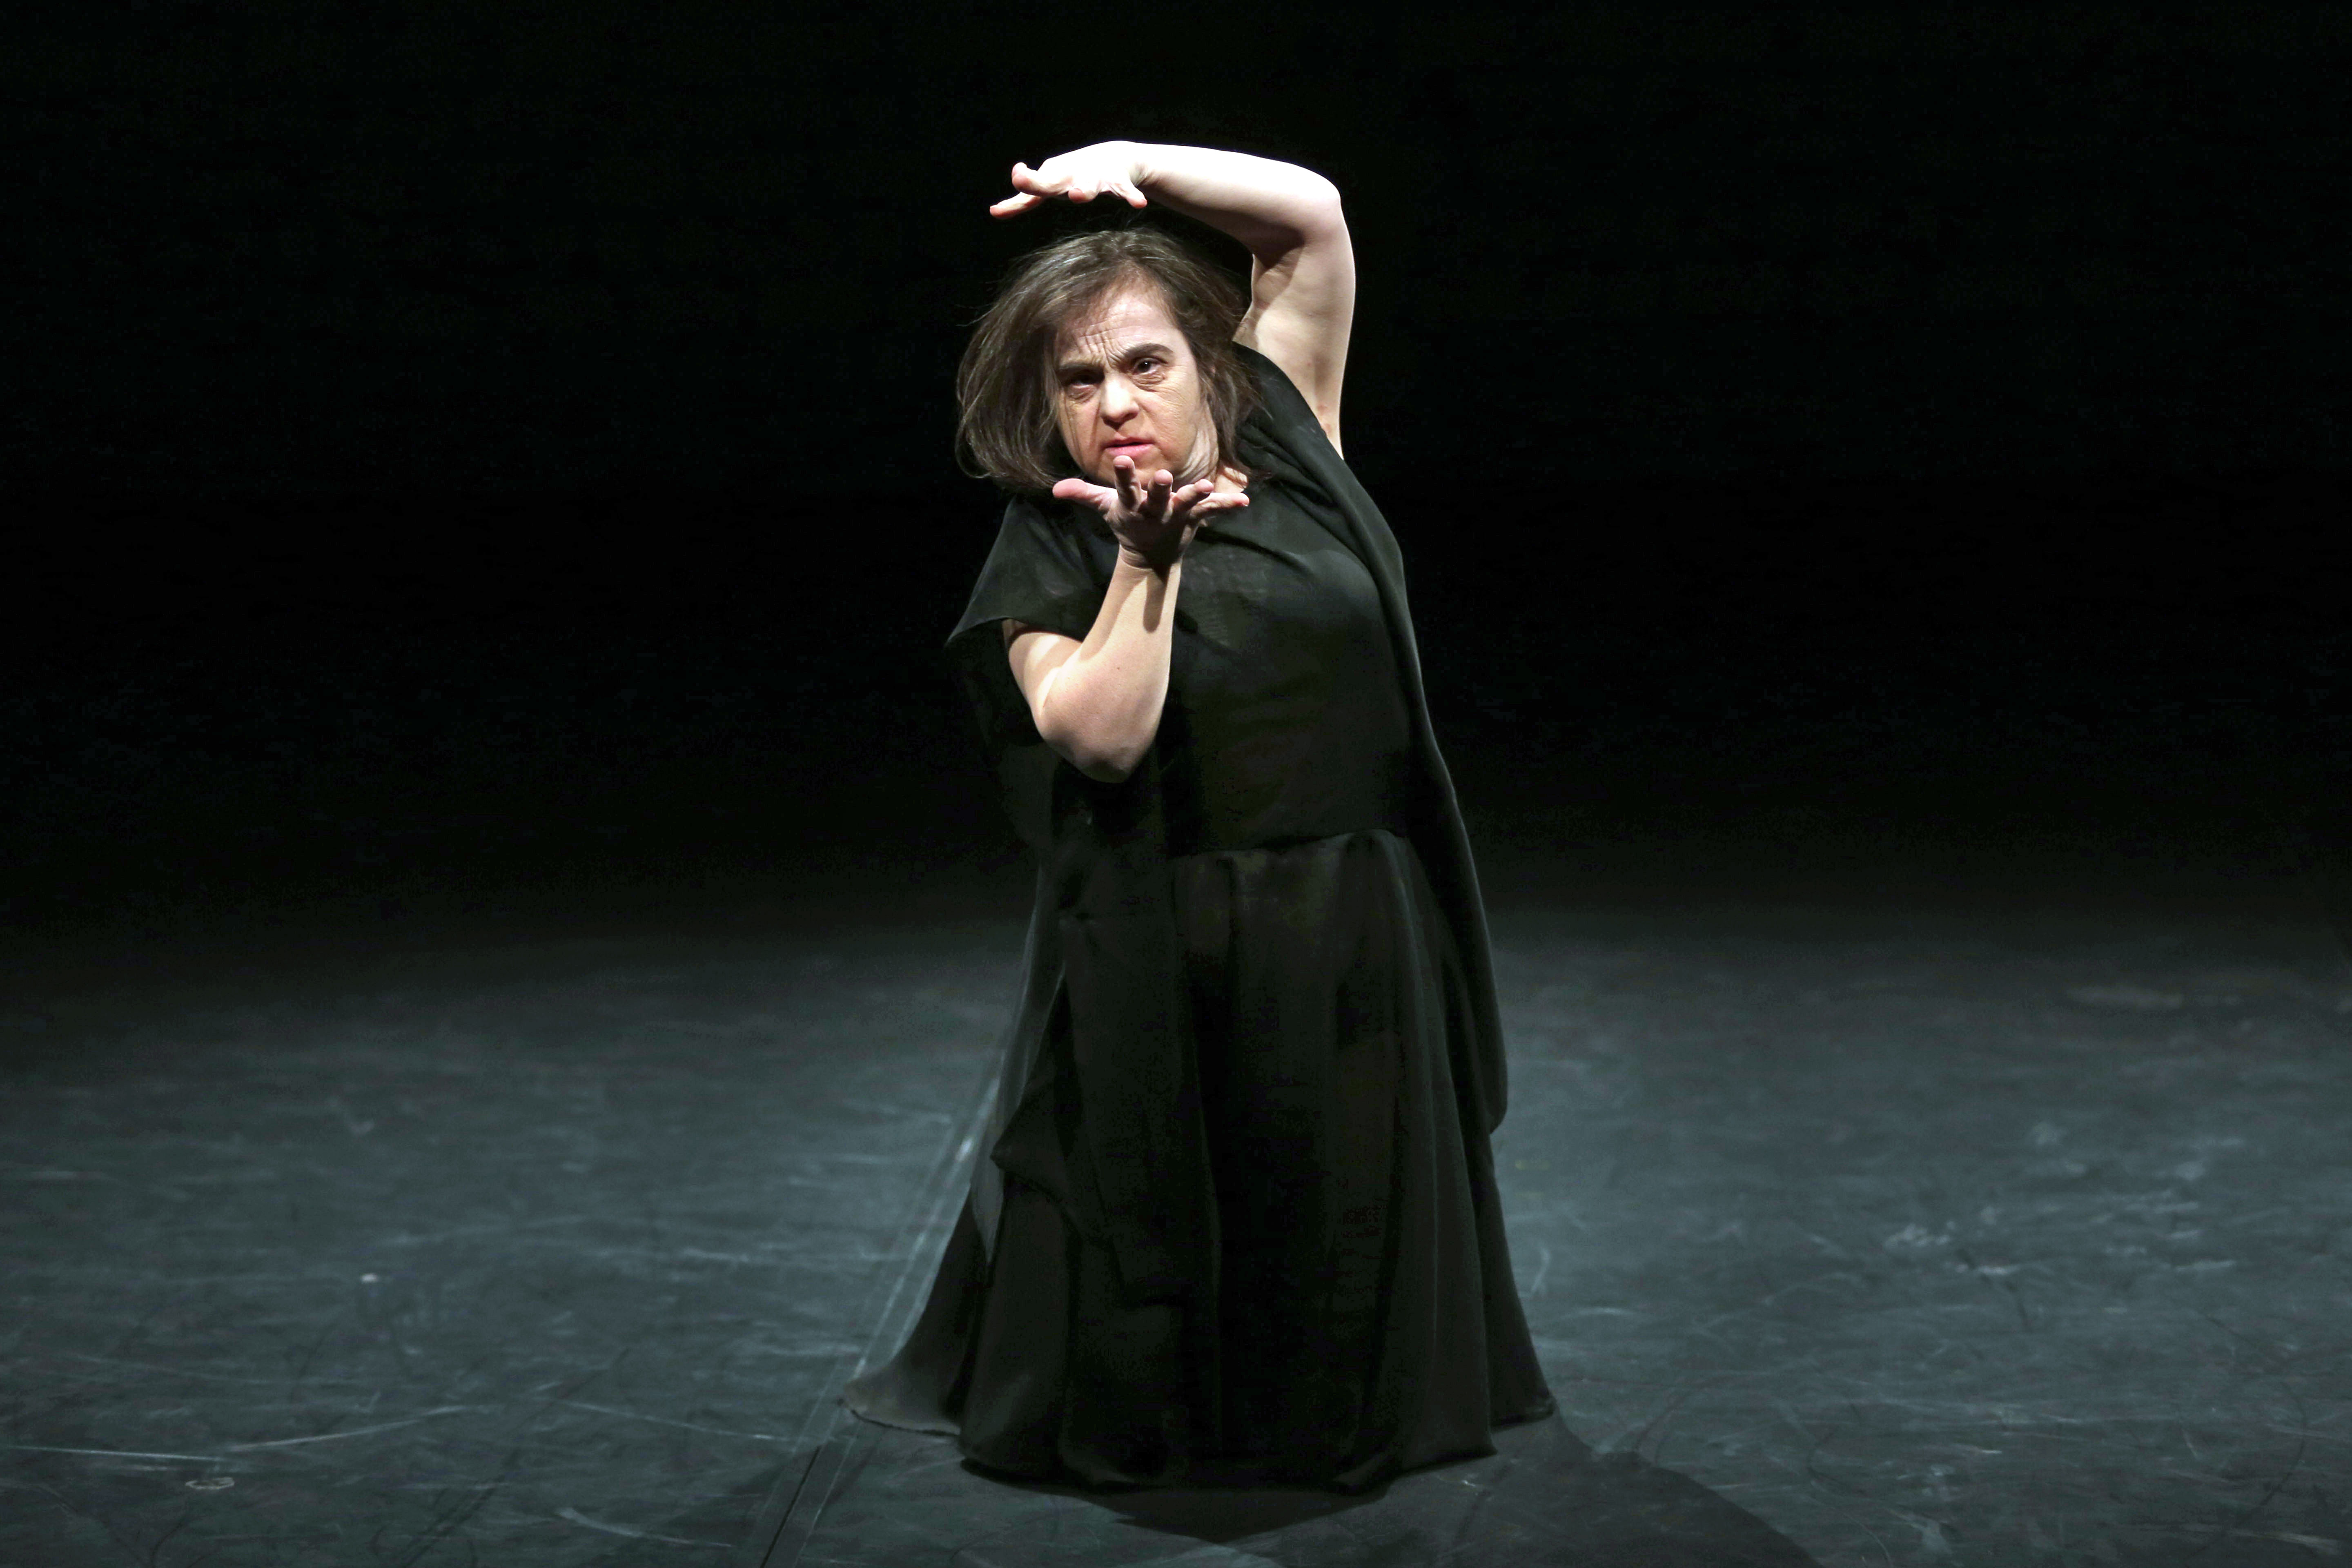 Learning disabled female performer dressed all in black gestures with hands